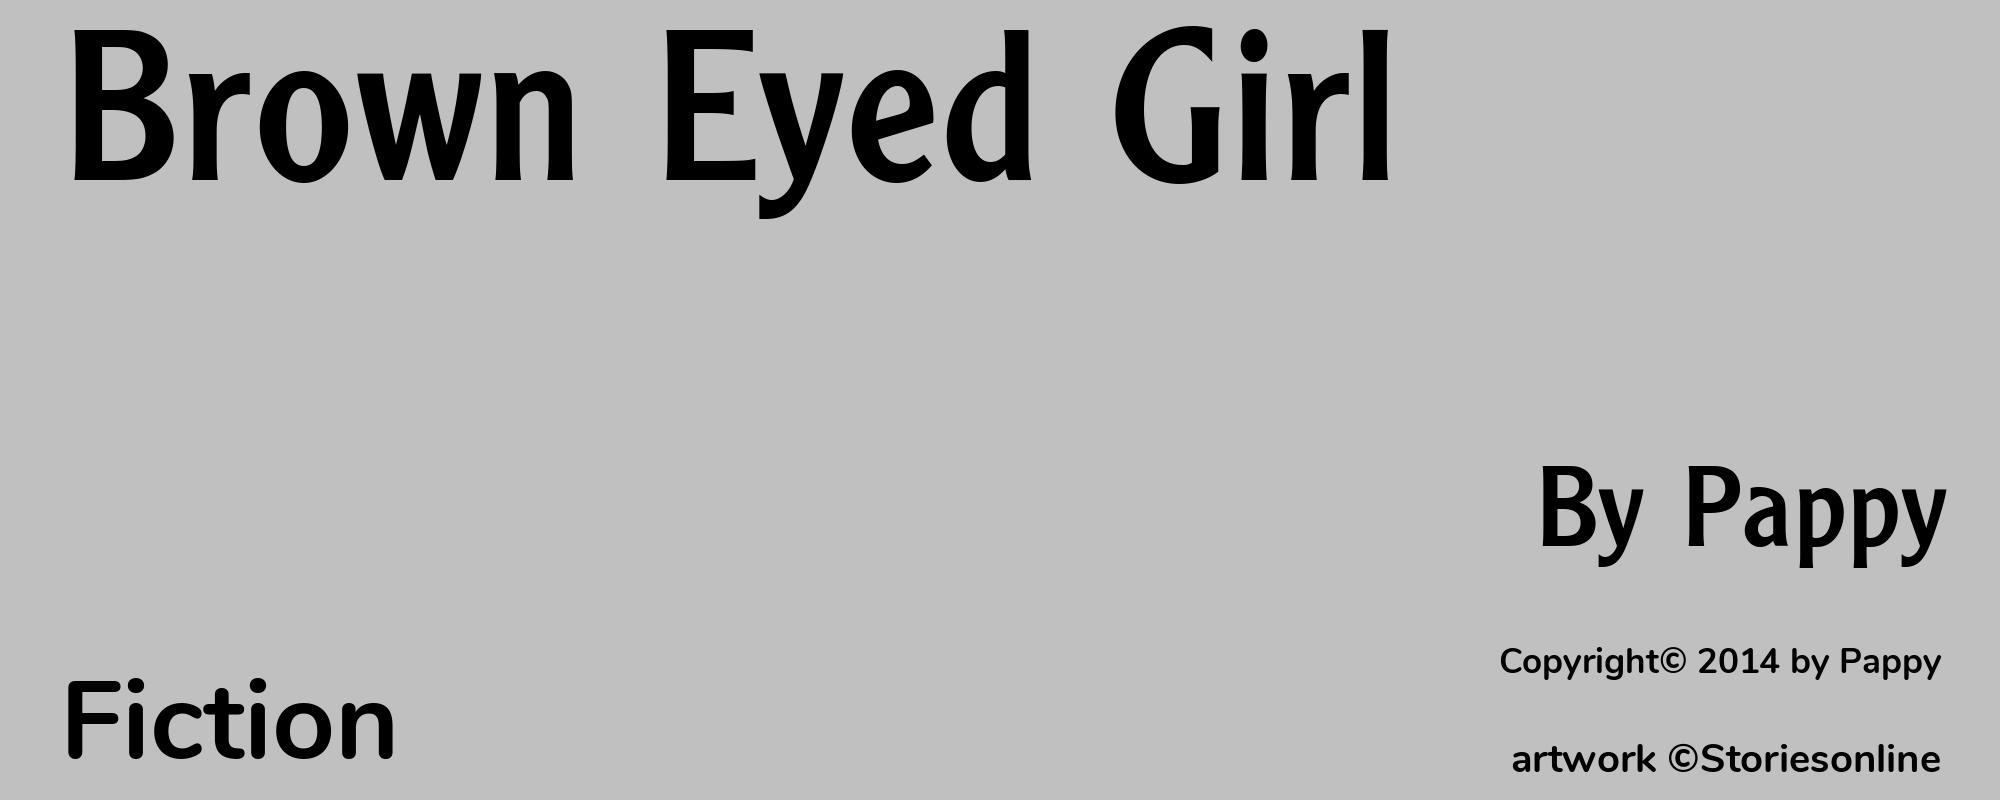 Brown Eyed Girl - Cover